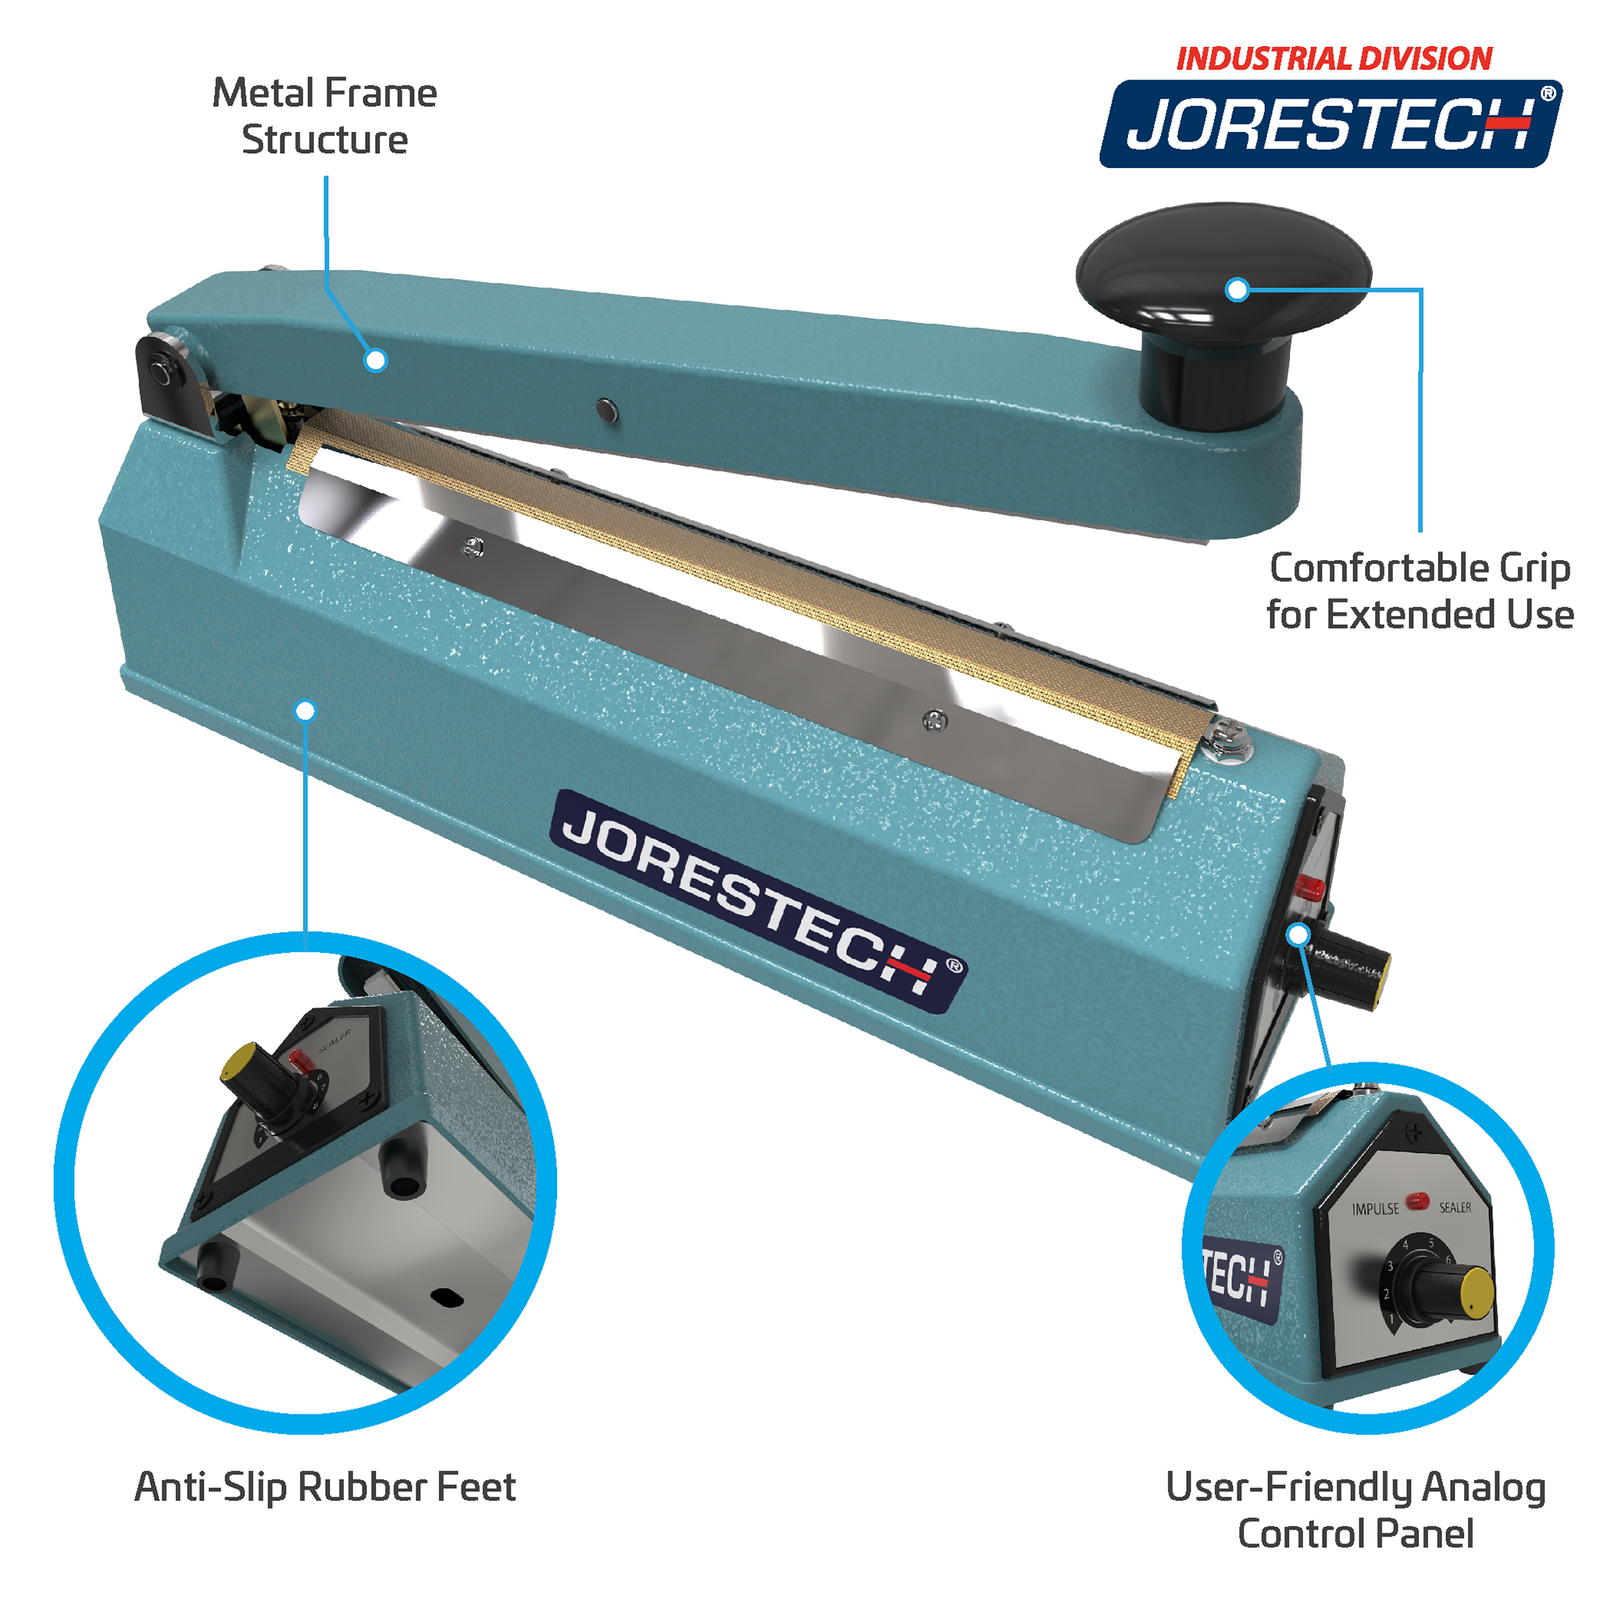 The 8 inch manual impulse sealer. Features include, Metal Frame Structure, Comfortable Grip for Extended Use, Anti-slip Rubber Feet, and User Friendly Analog Control Panel. Zoom in close-ups of rubber feet and control panel.